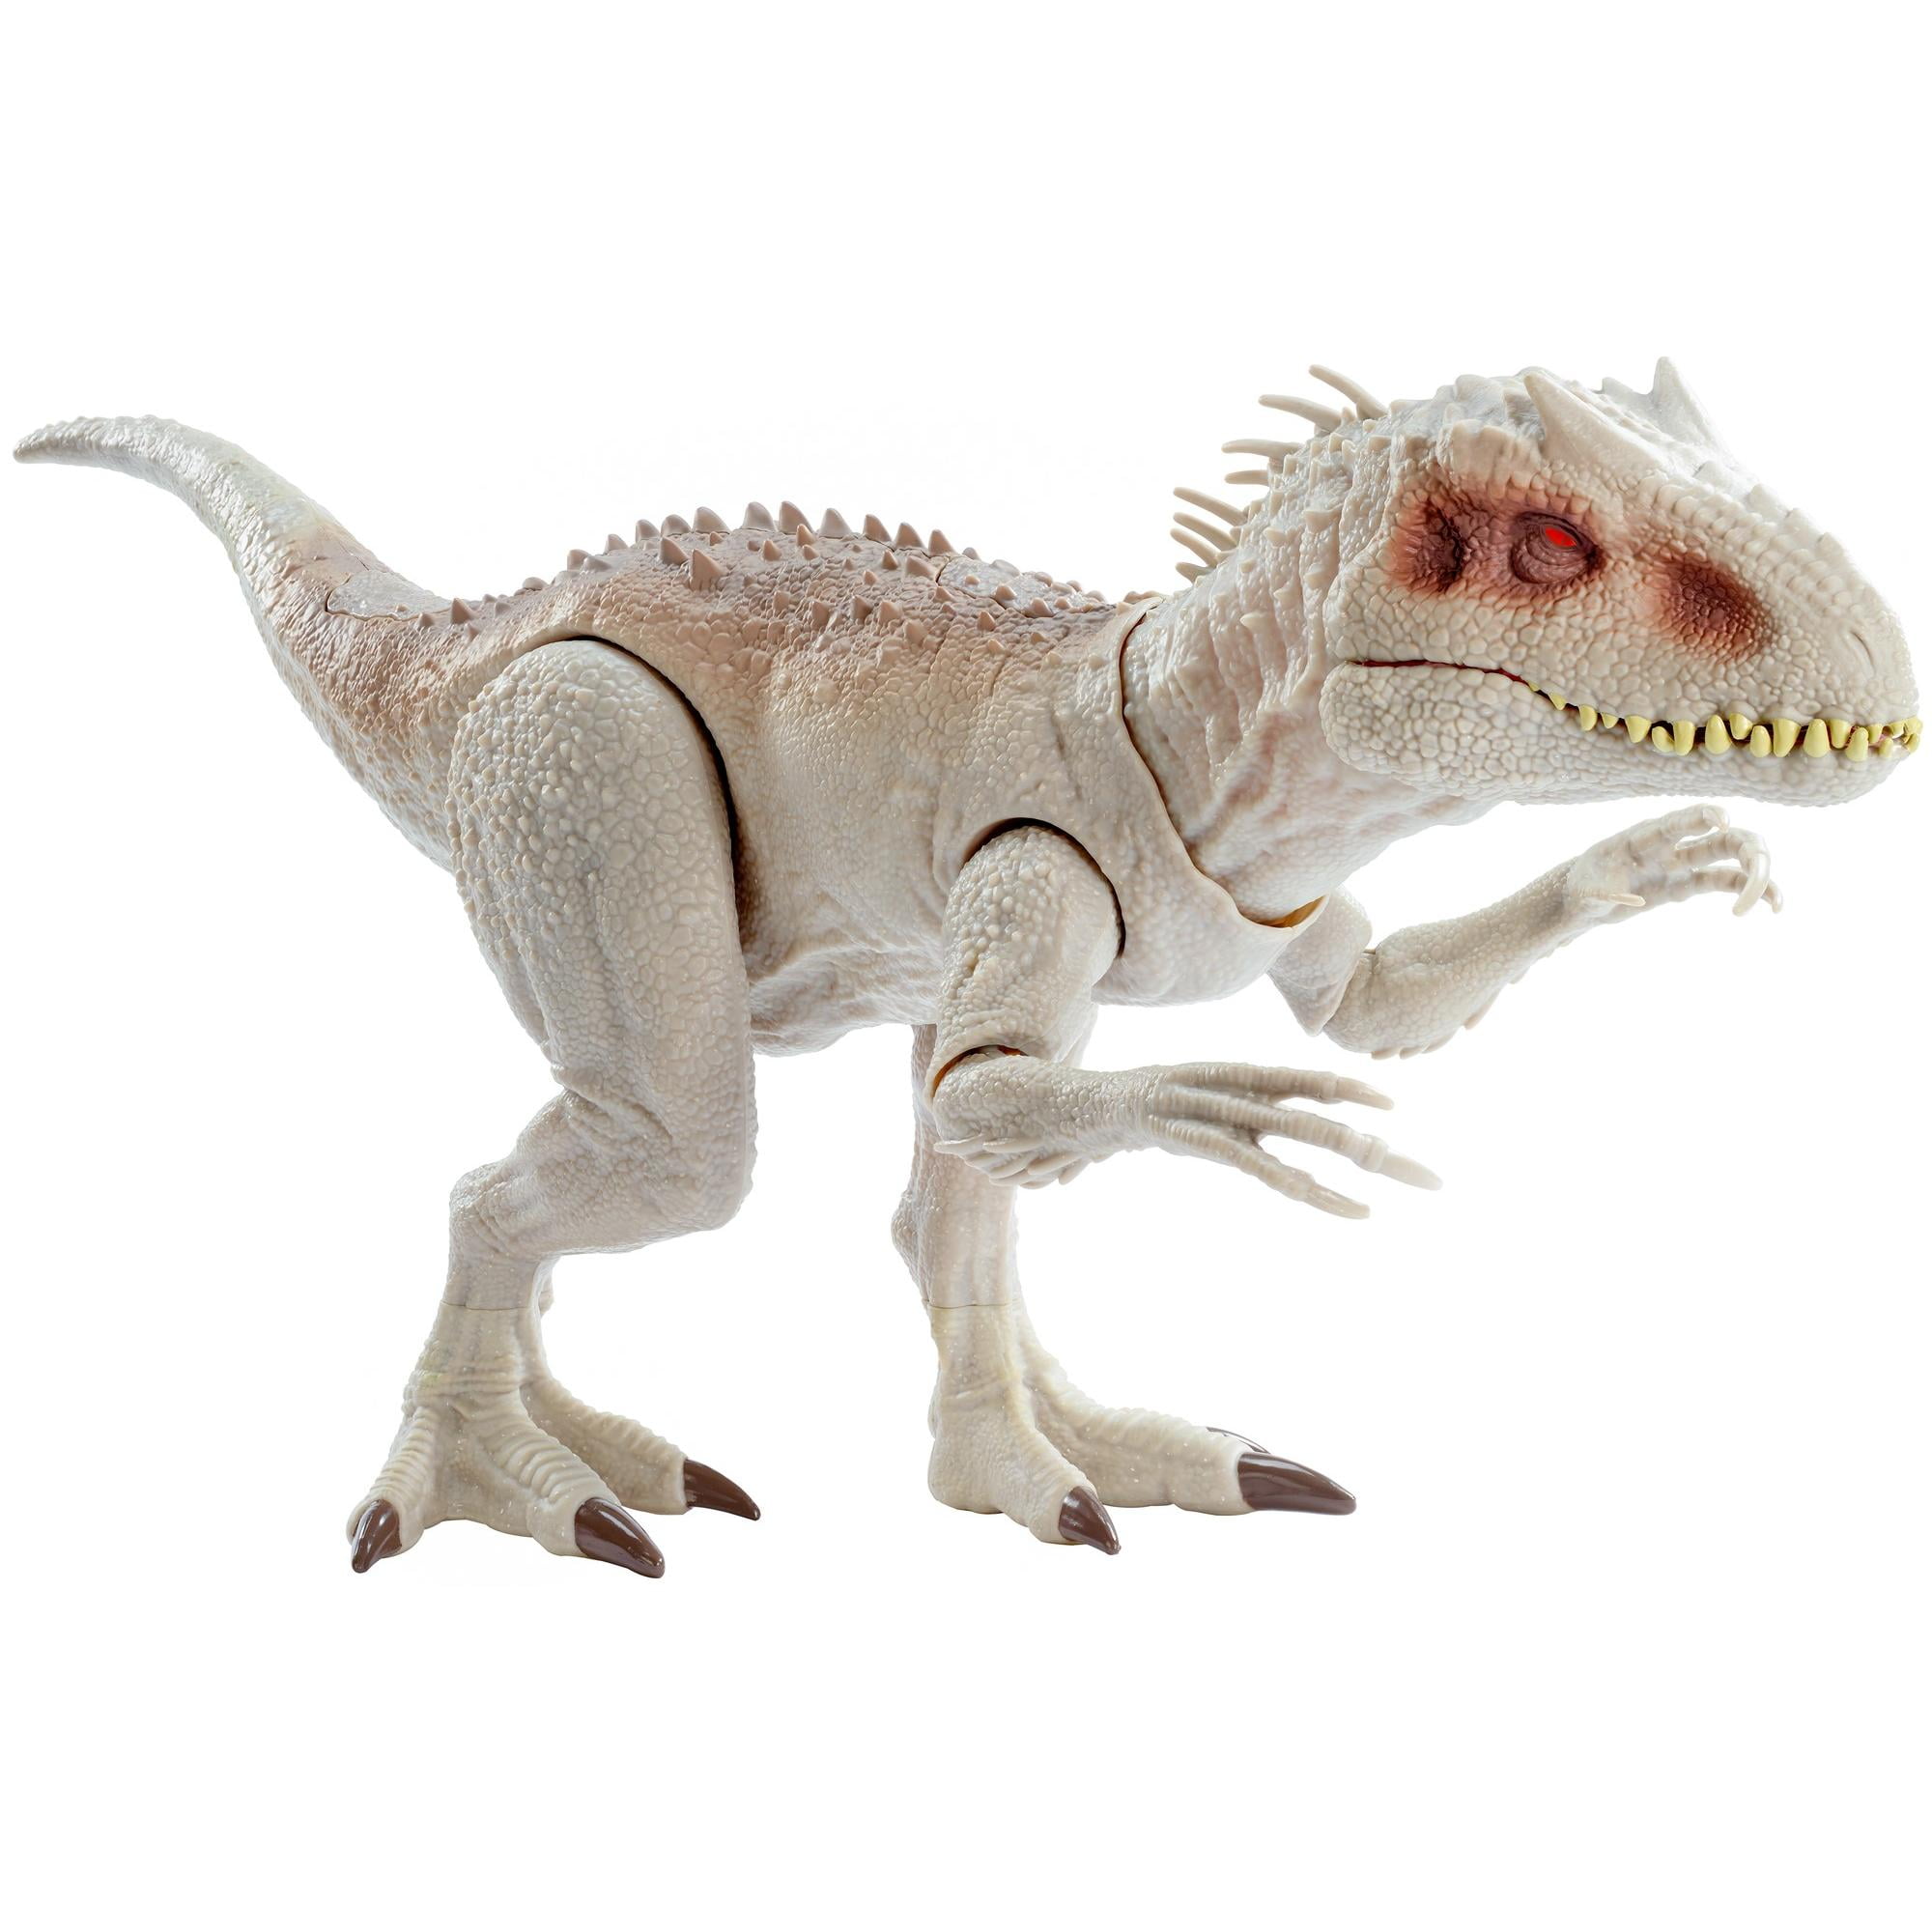 ​​Jurassic World Destroy ‘N Devour Indominus Rex Dinosaur Action Figure with Motion, Sound and Eating Feature, Toy Gift ​